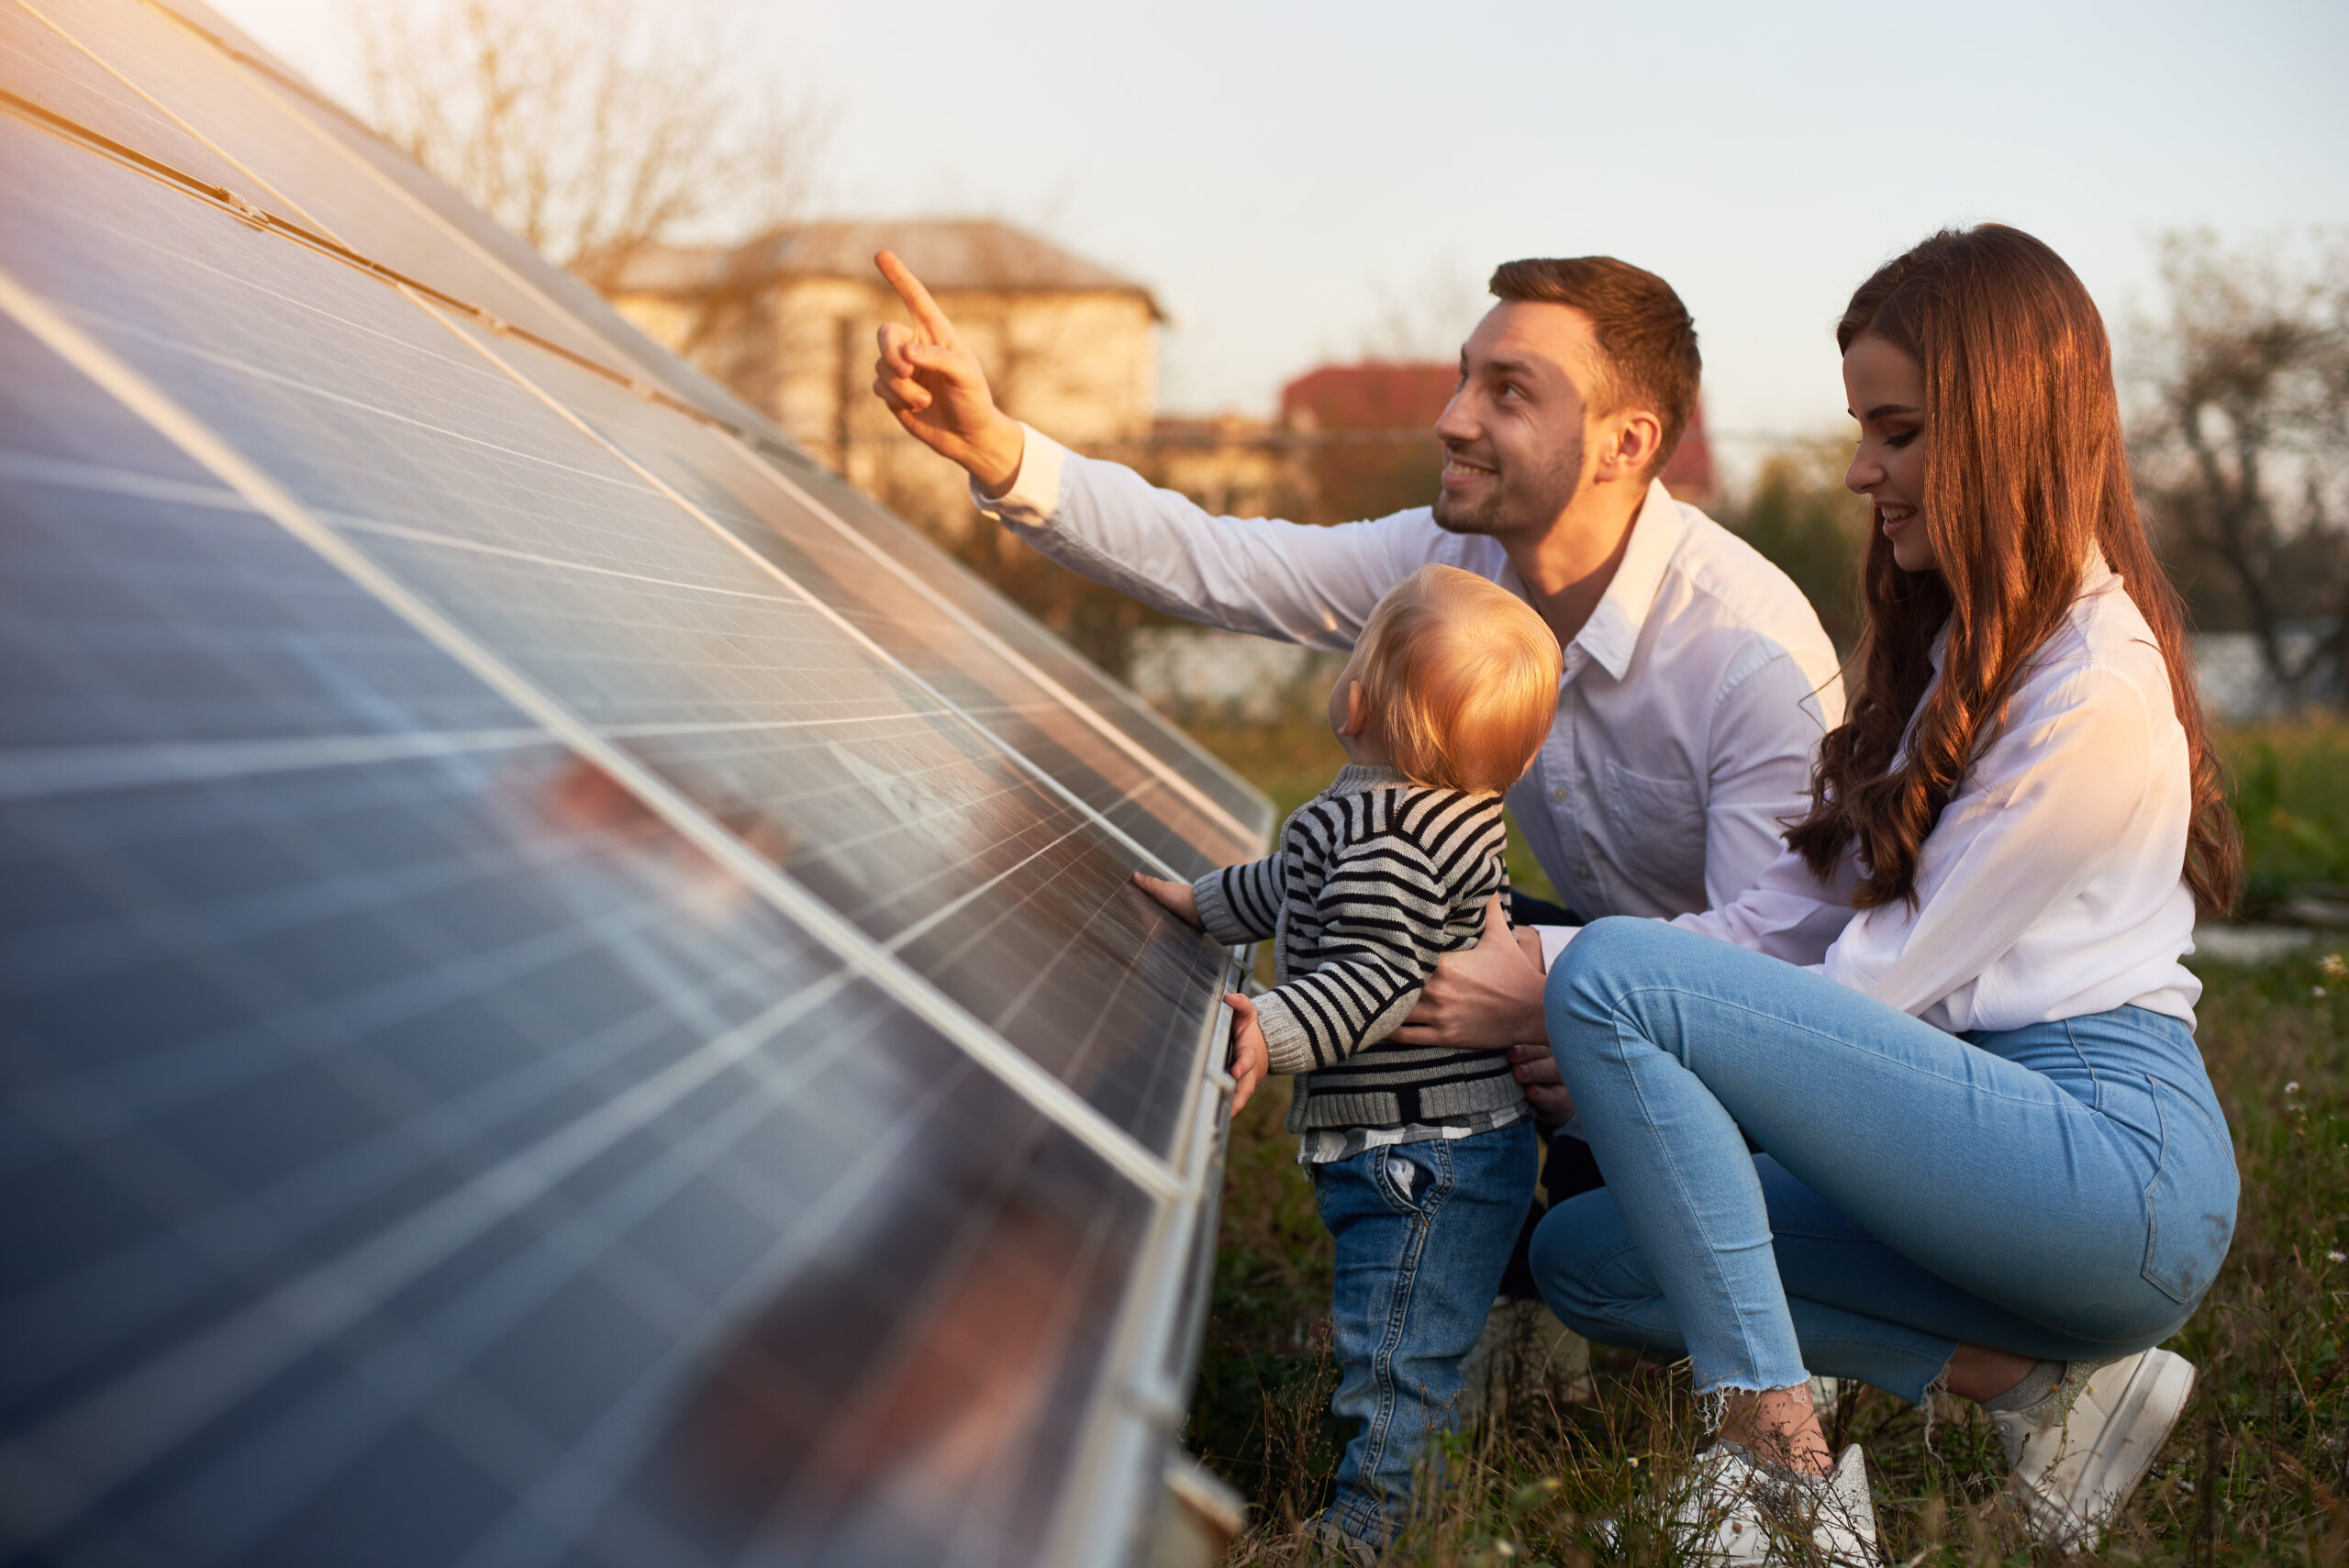 Geek insider, geekinsider, geekinsider. Com,, 5 solar panel maintenance tips for homeowners, living